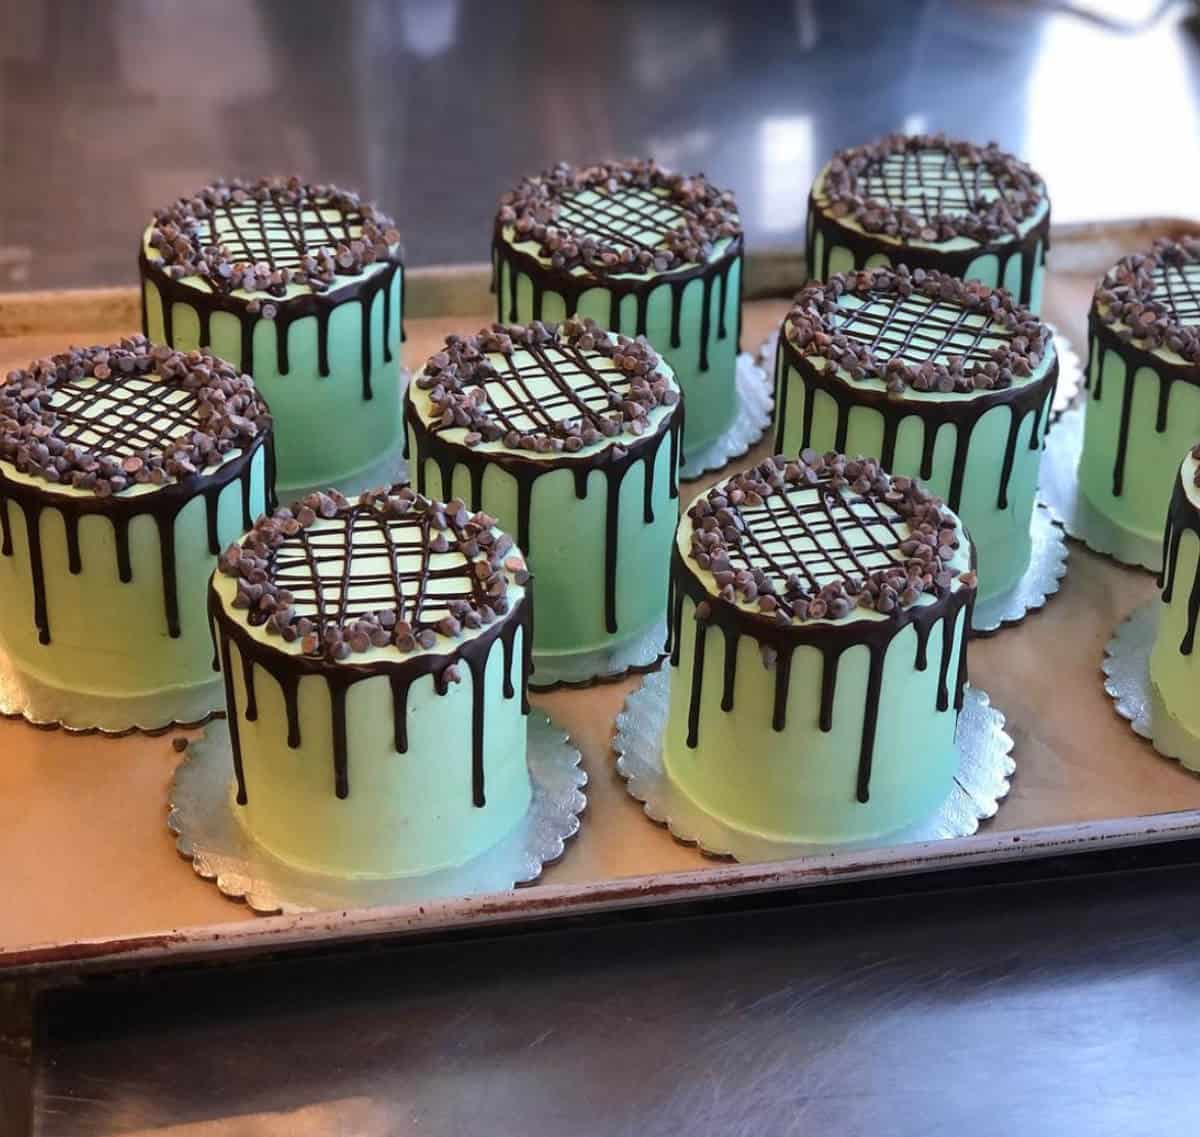 A cluster of Chocolate Creme de Menthe cakes on individual cake platters.